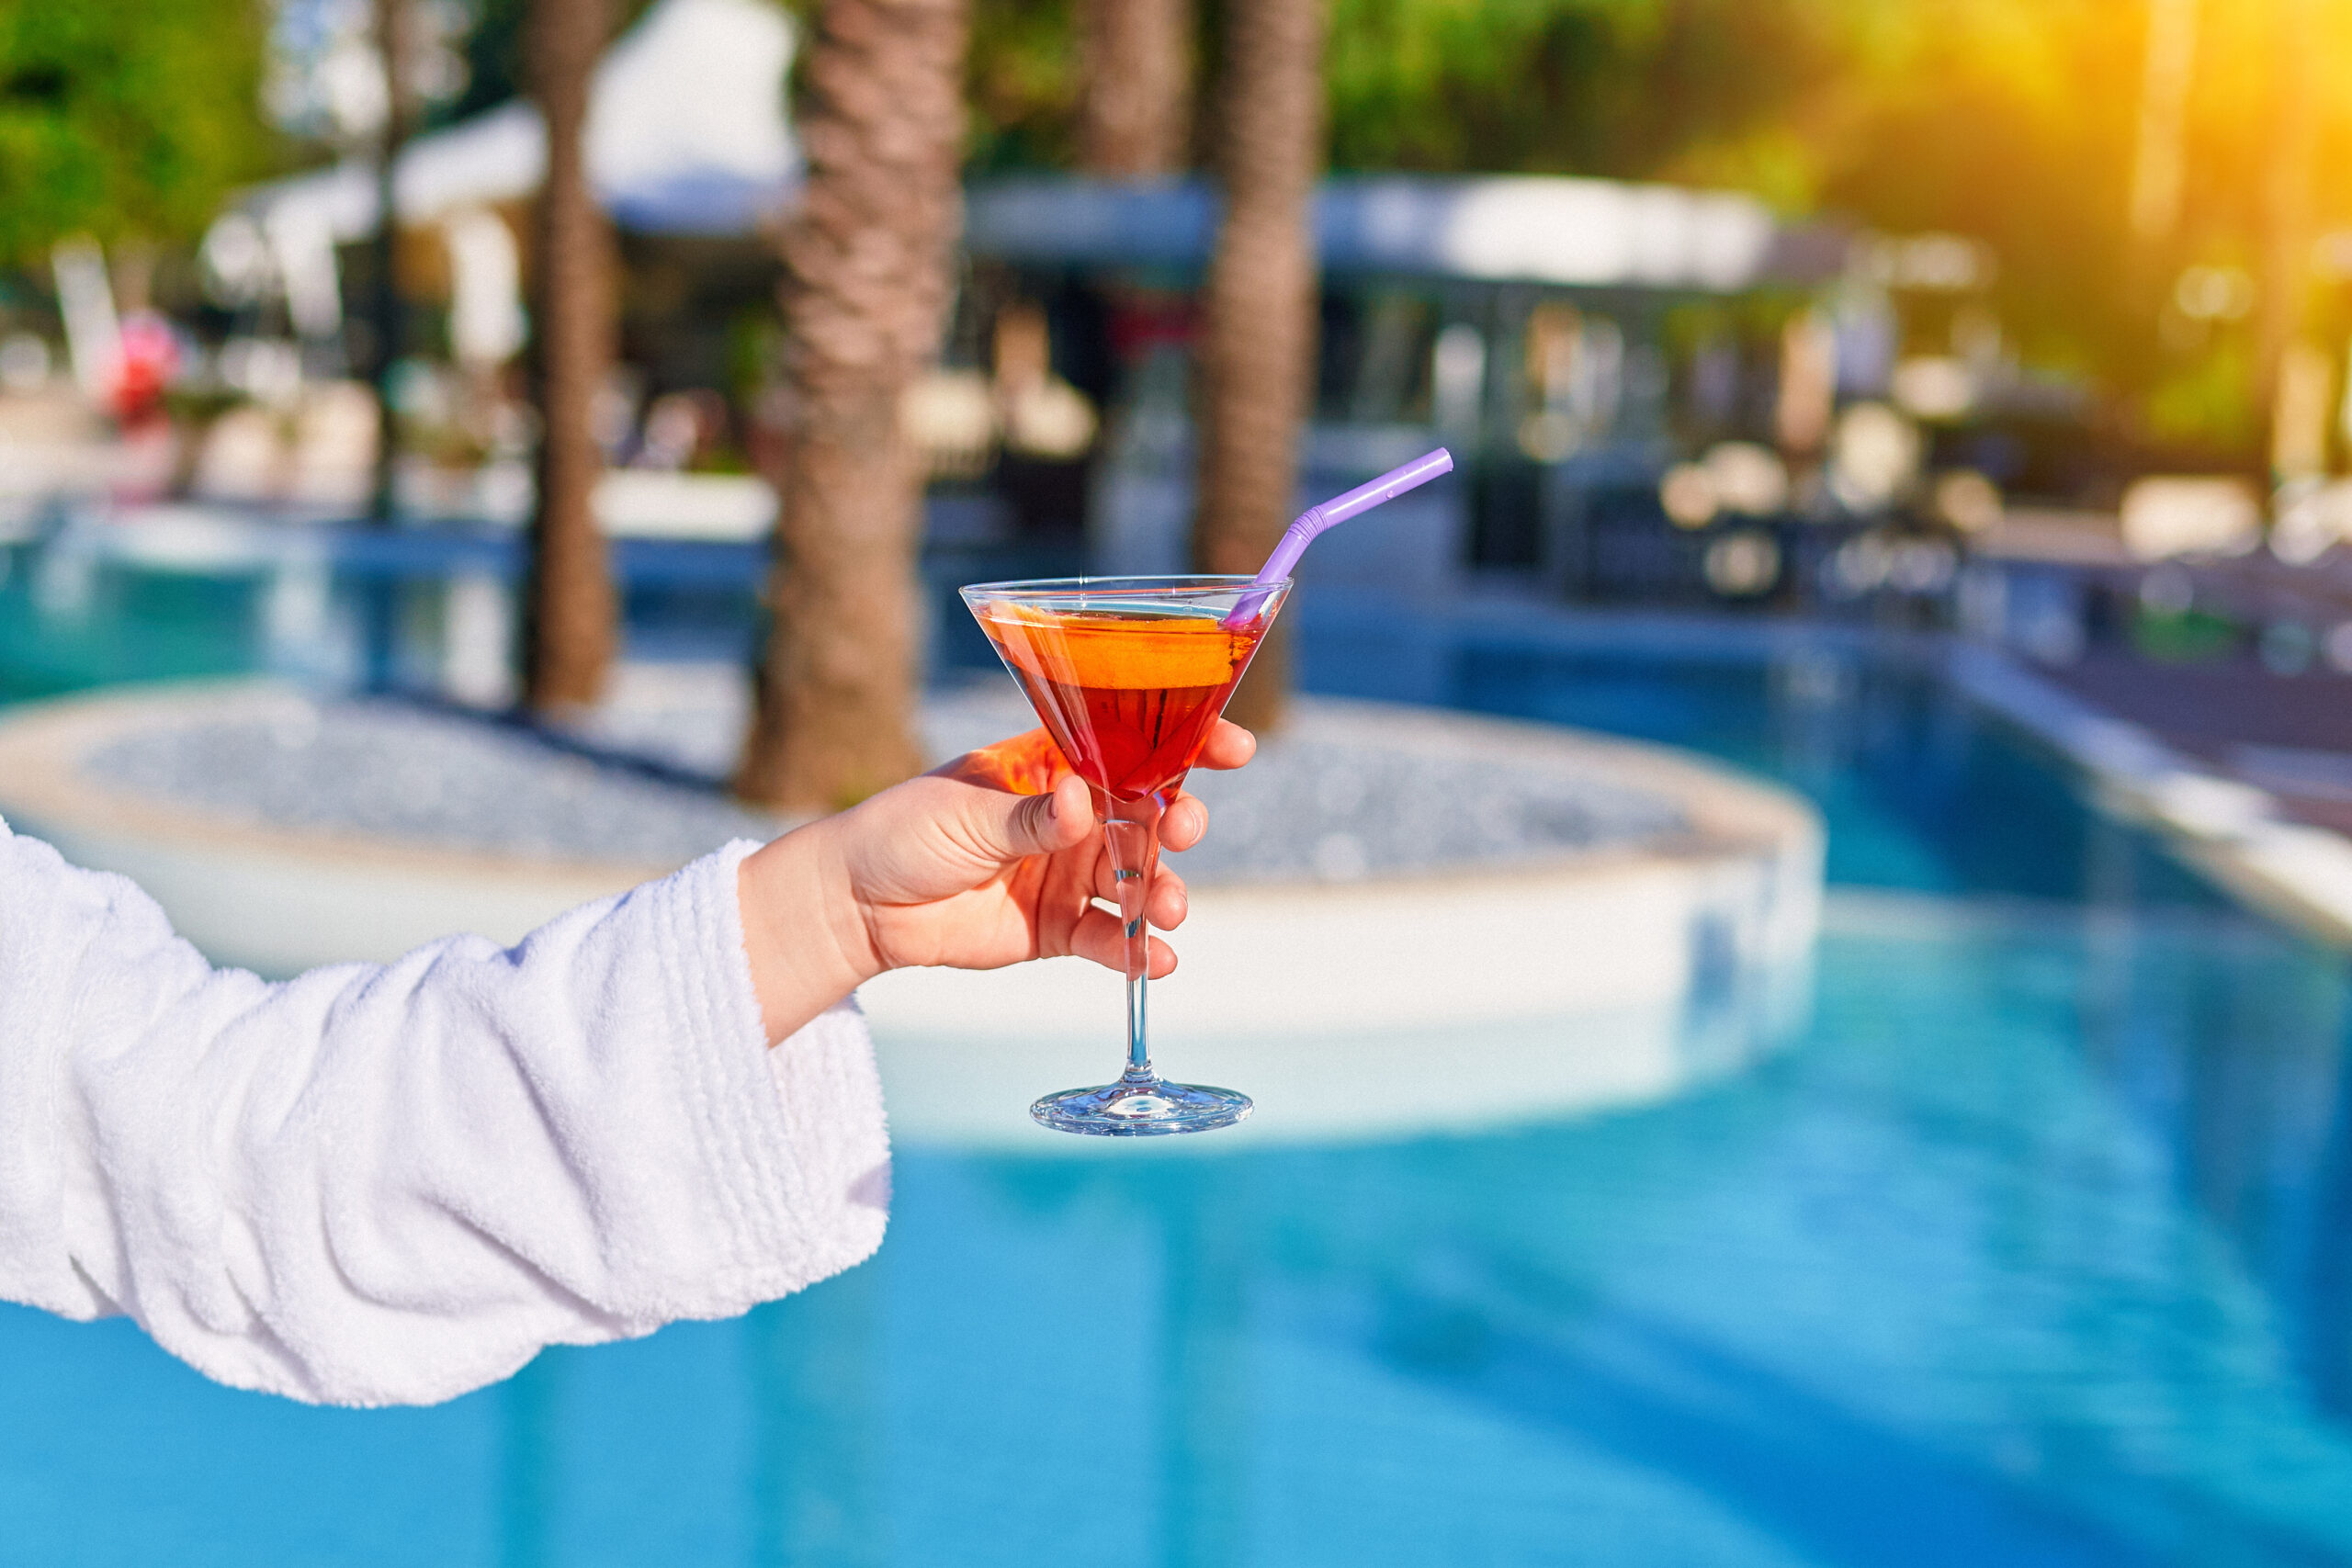 Relaxing vacations with refreshing aperol cocktail by the pool at the all-inclusive resort.